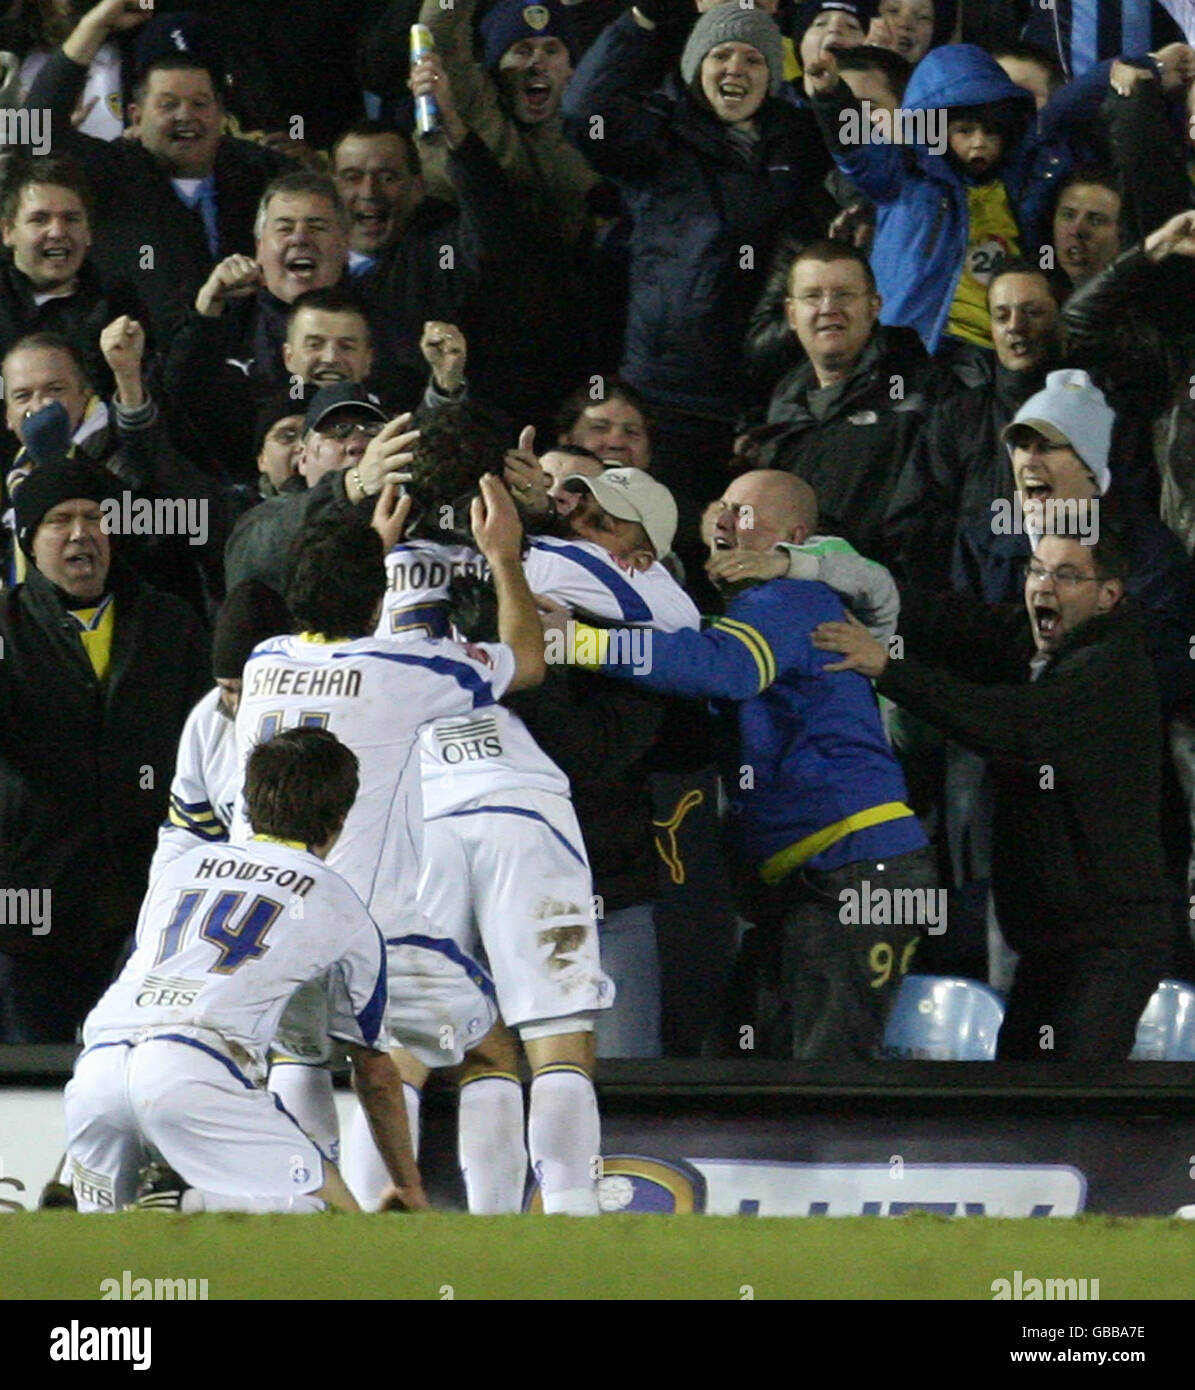 Leeds United's Robert Snodgrass is mobbed by fans and players after equalising during the Coca-Cola League One match at Elland Road, Leeds. Stock Photo